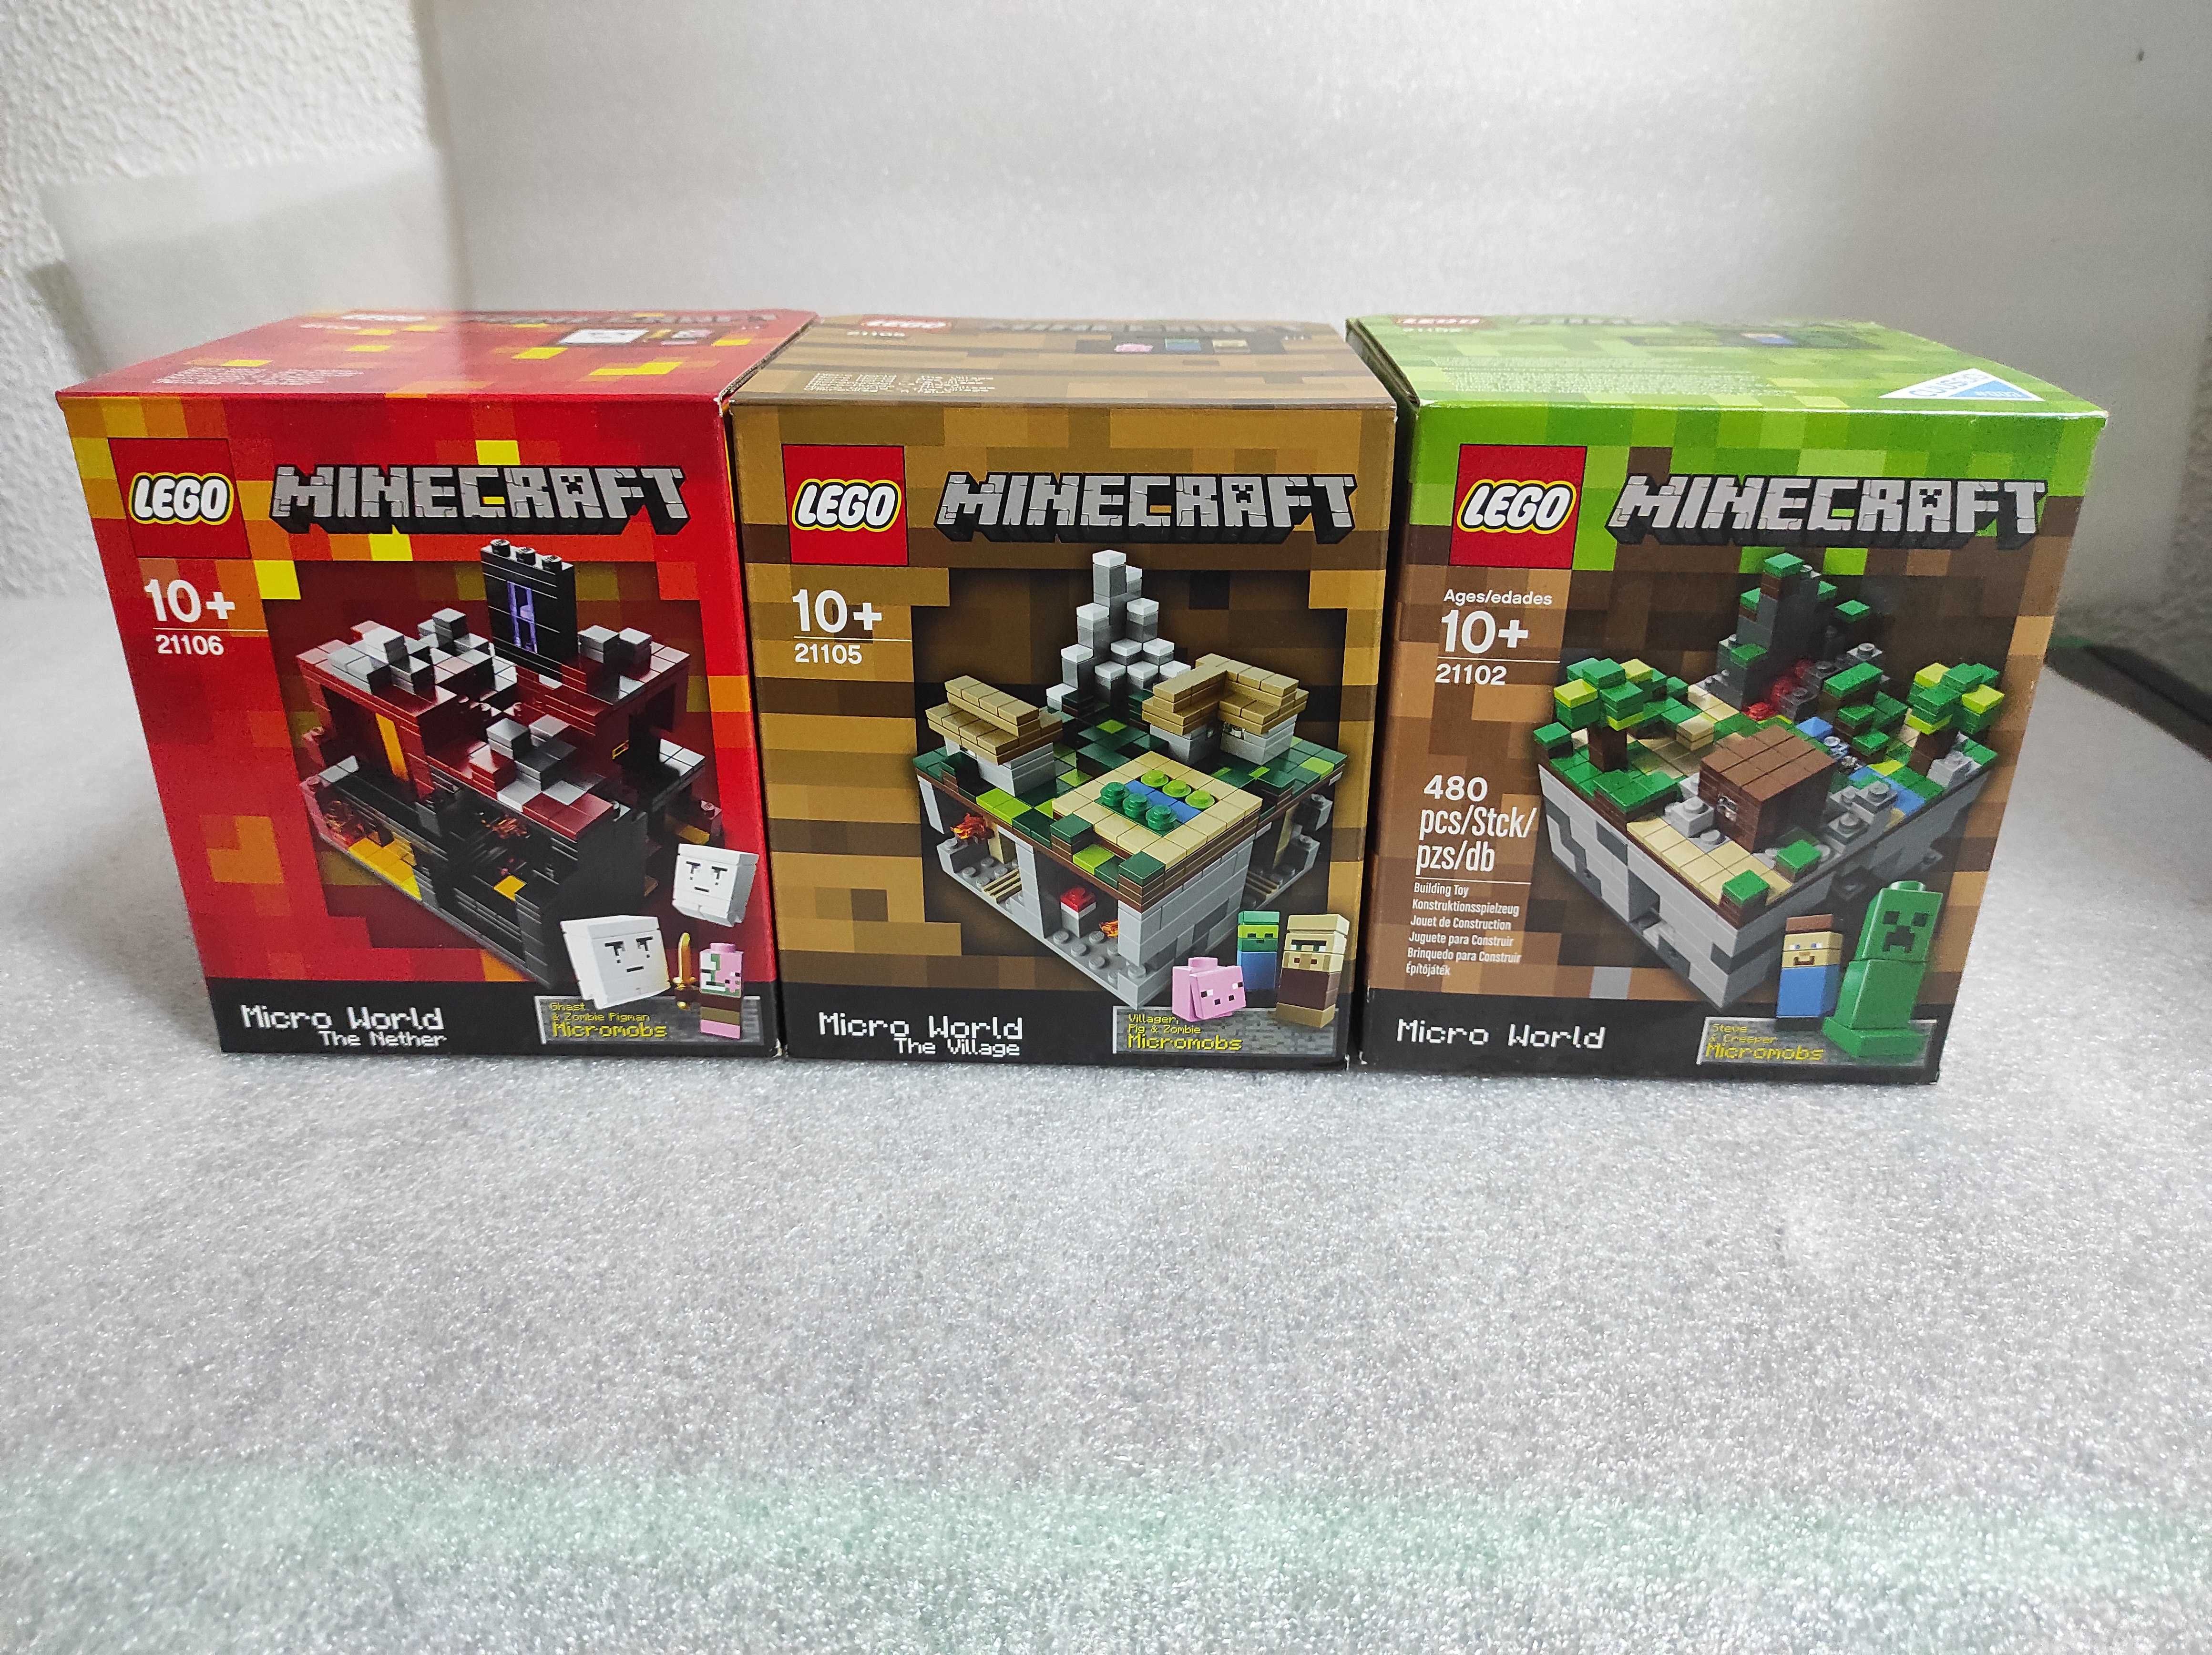 LEGO 21102 Minecraft The Forest 21105 The Village 21106 The Nether